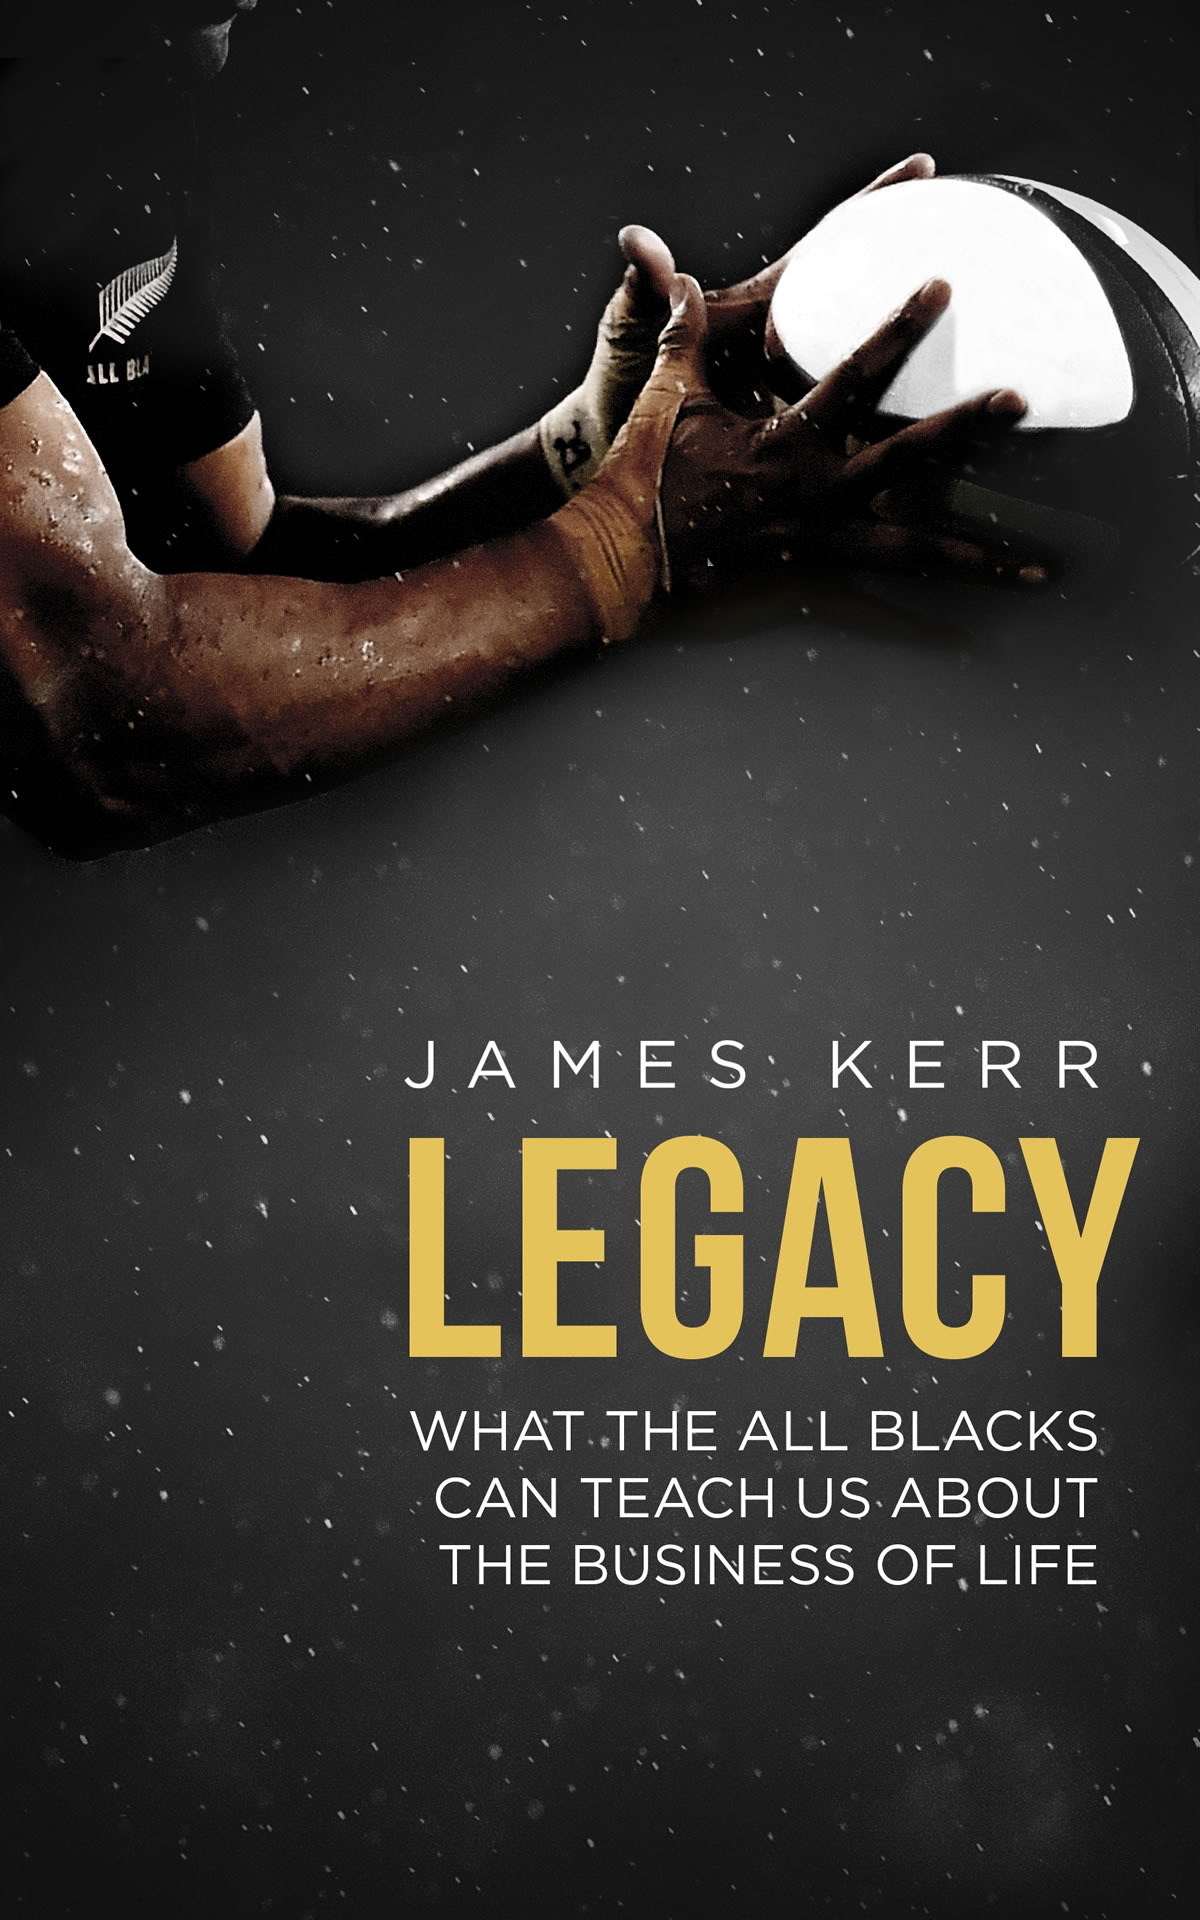 Legacy by James Kerr - image courtesy of Little, Brown Book Group